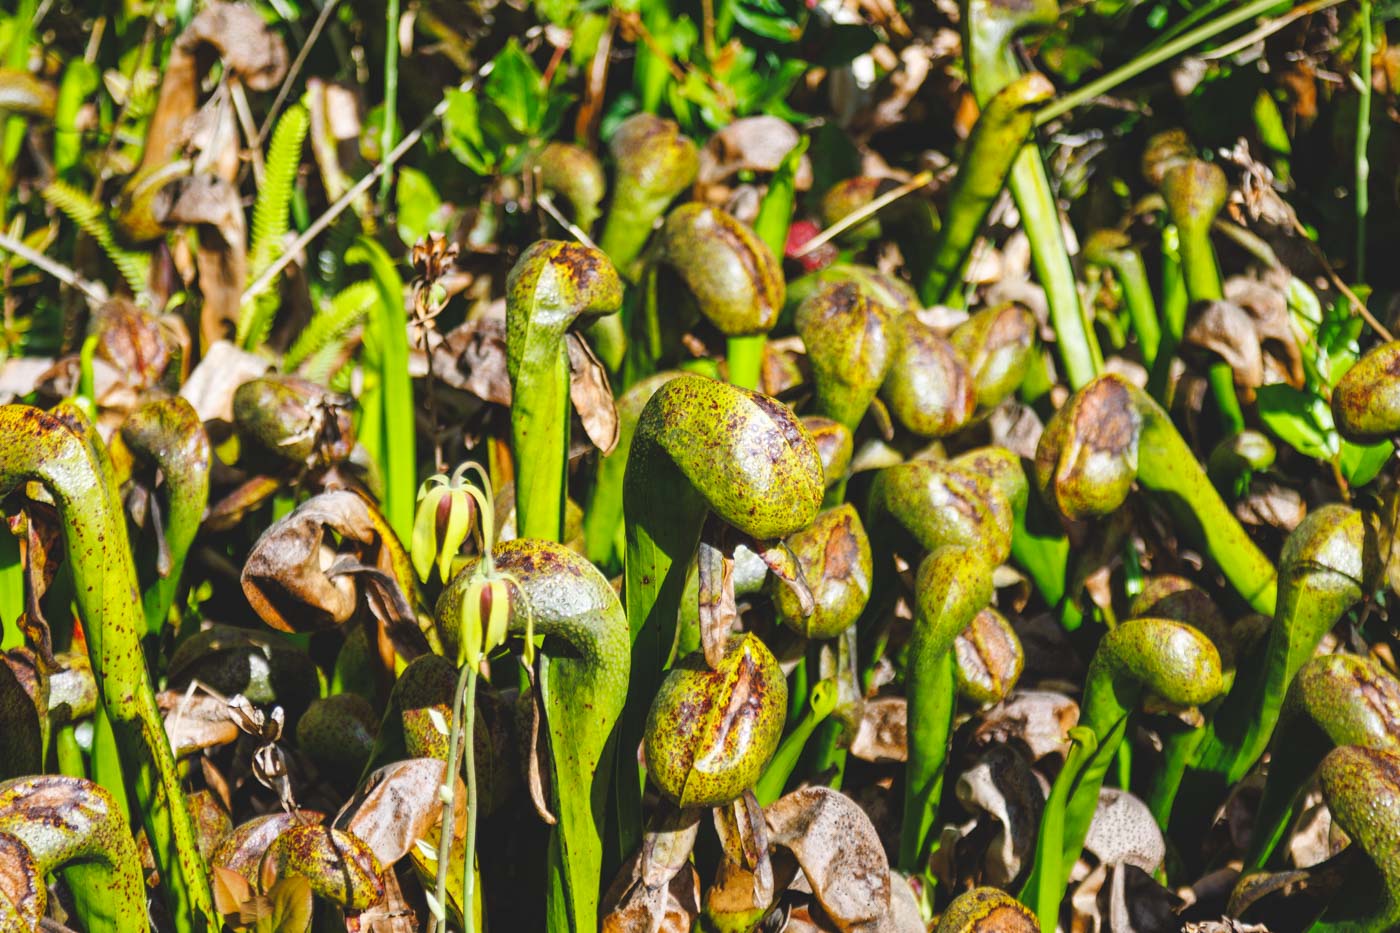 Close up of a group of carnivorous plants in Darlingtonia State Natural Park.